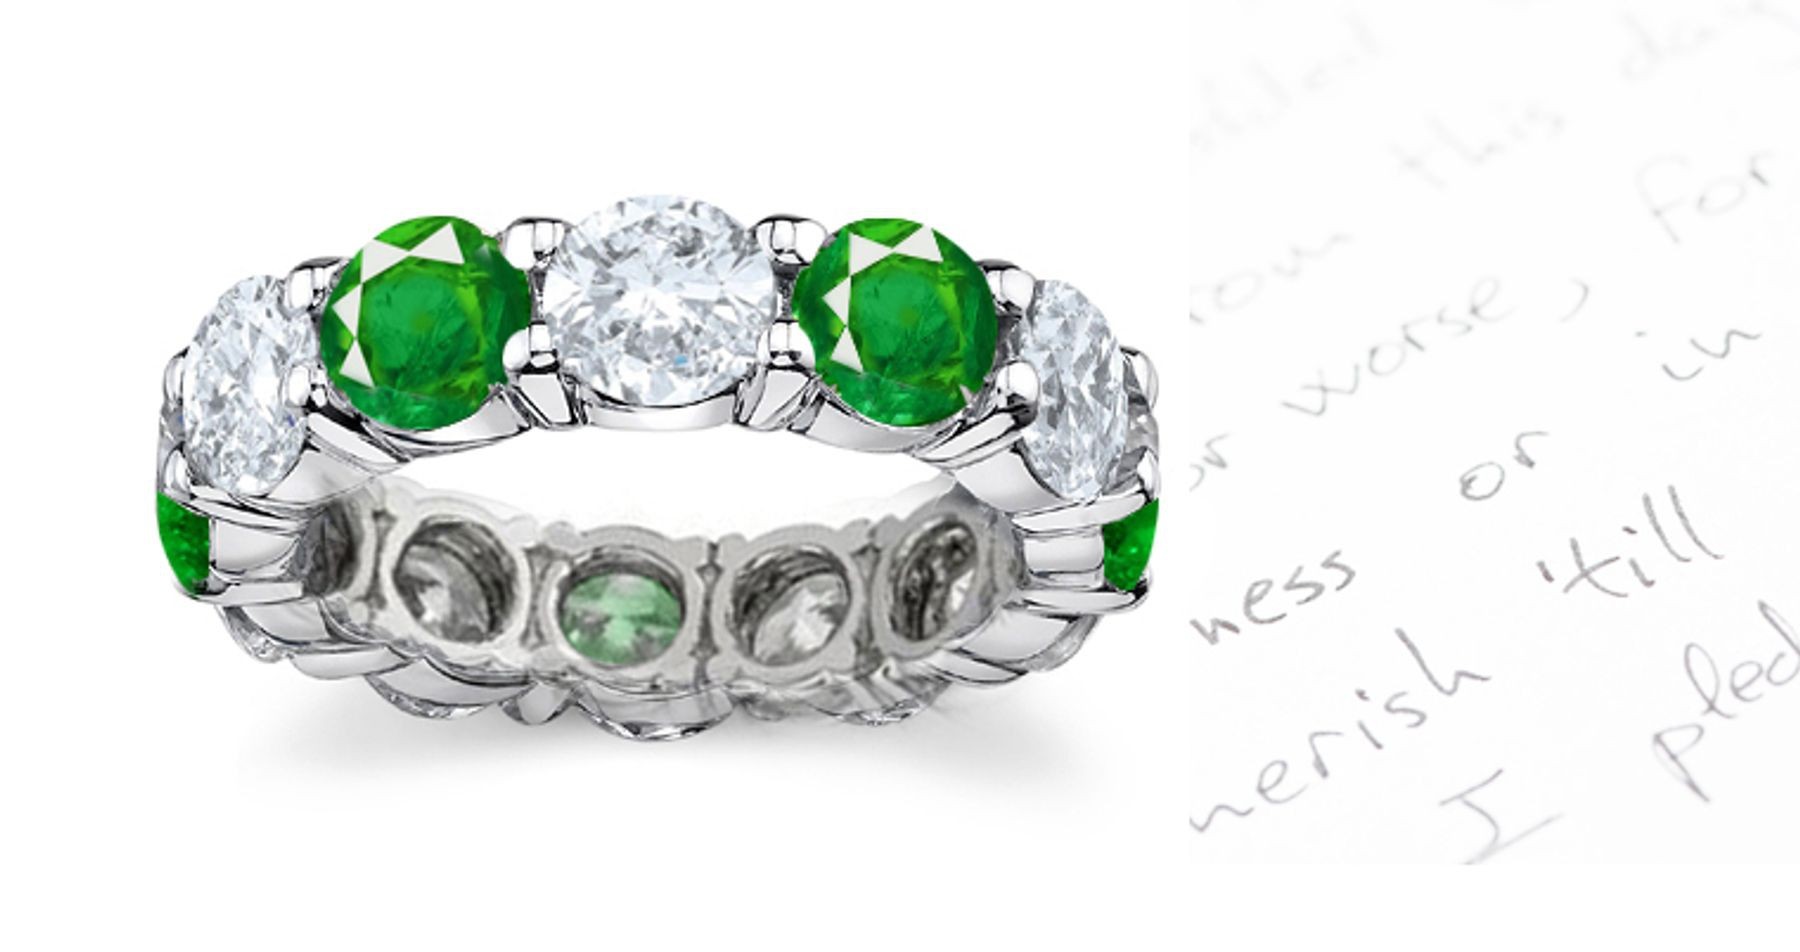 Emerald Jewelry Eternity Rings: The luck of the Irish will be with you in this Emerald and Diamond Rounds Prong Set Rings in 14K White Gold